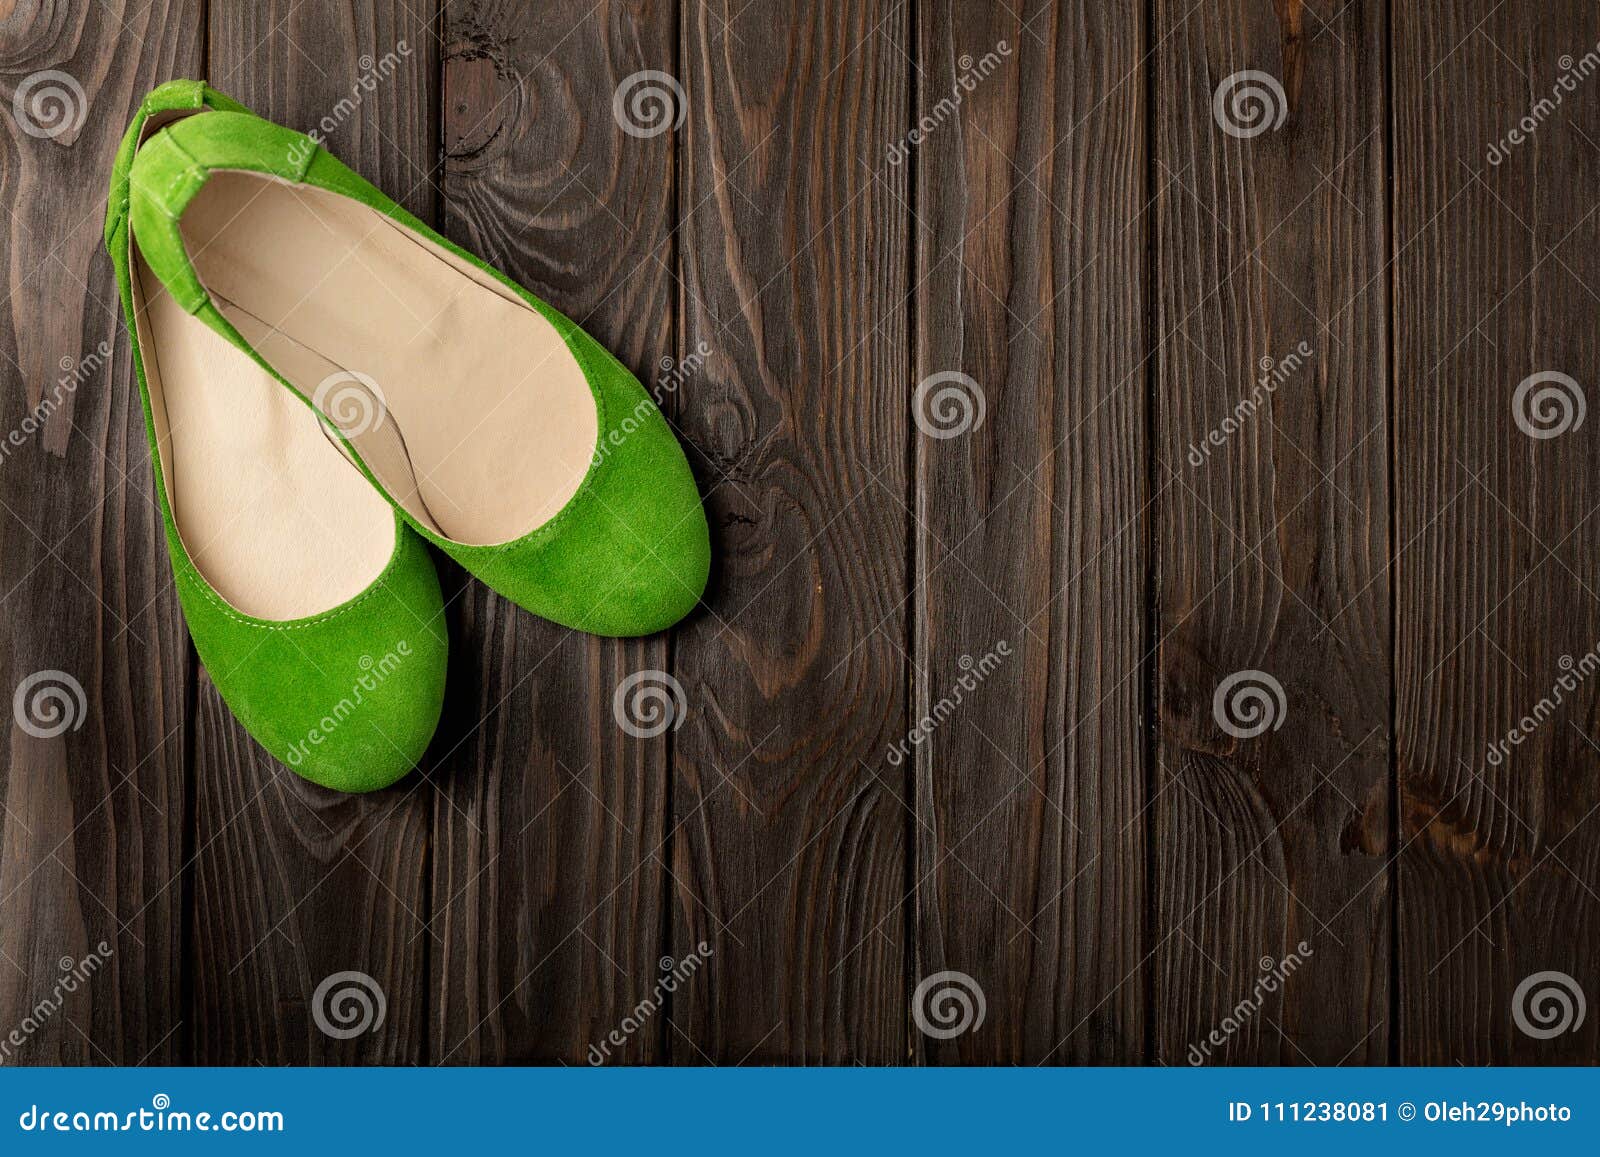 Green Women`s Shoes Ballerinas on Wooden Background. Stock Image ...